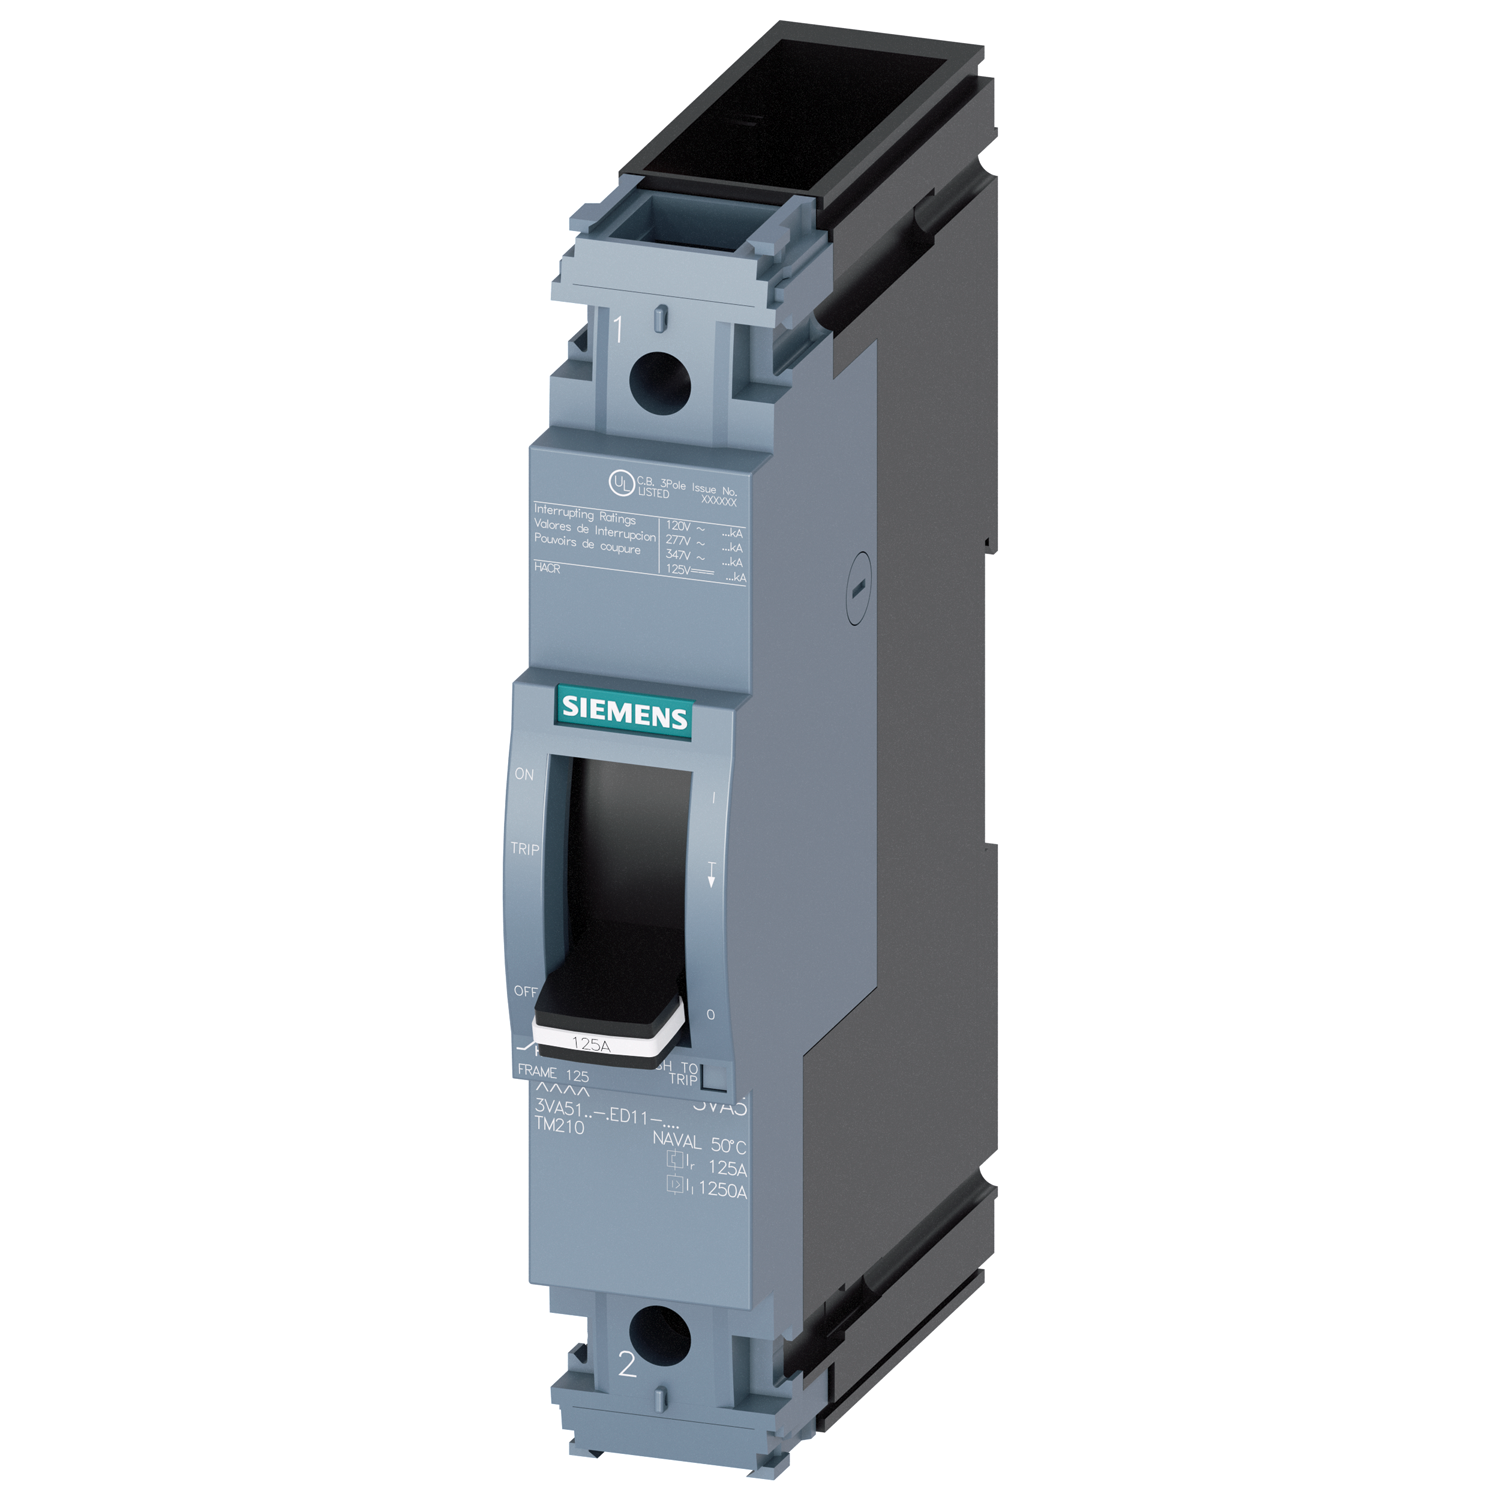 SIEMENS LOW VOLTAGE 3VA UL MOLDED CASE CIRCUIT BREAKER WITH THERMAL - MAGNETIC TRIP UNIT. 3VA51 FRAME WITH STANDARD (CLASS S) BREAKING CAPACITY. 125A 3-POLE (14KAIC AT 600Y/347) (25KAIC AT 480V). TM210 TRIP UNIT WITH FIXED Ir FIXED Ii. SPECIAL FEATURES WITHOUT LUGS NAVAL RATED 50C. DIMENSIONS (W x H x D) IN 3 x 5.5 x 3.7.